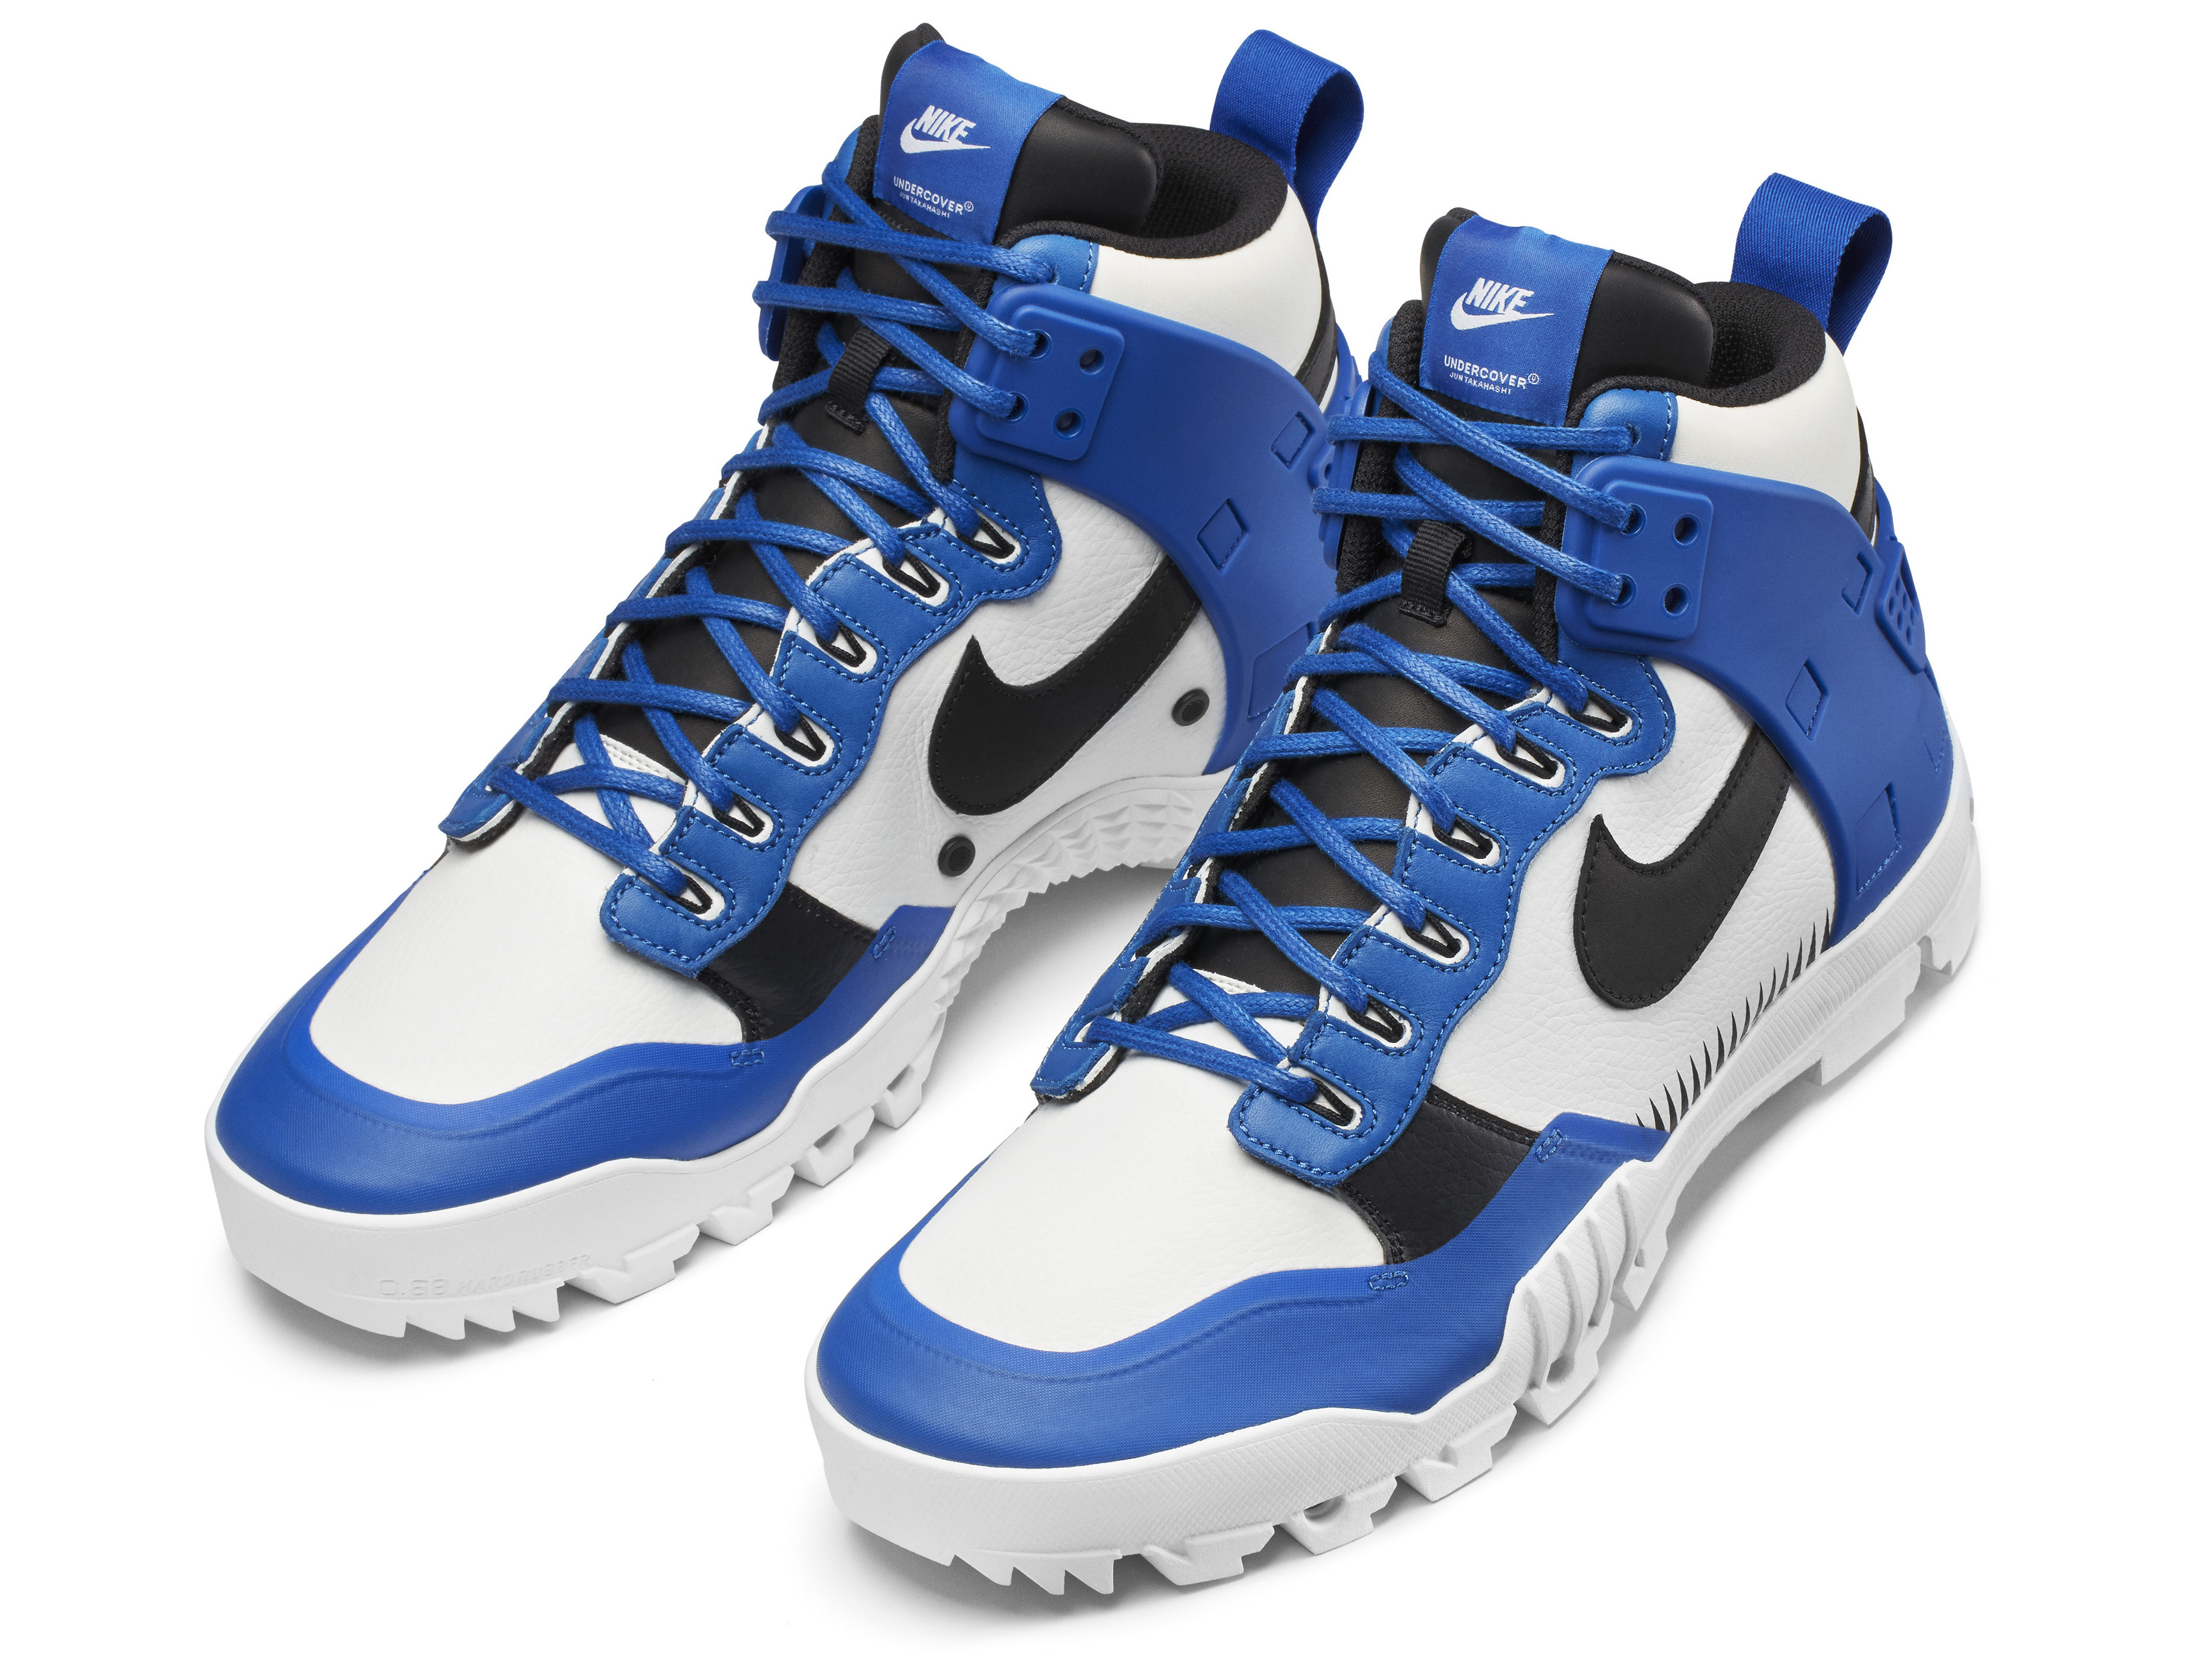 Undercover x Nike SFB Jungle Dunk &quot;White/Black/Game Royal&quot;